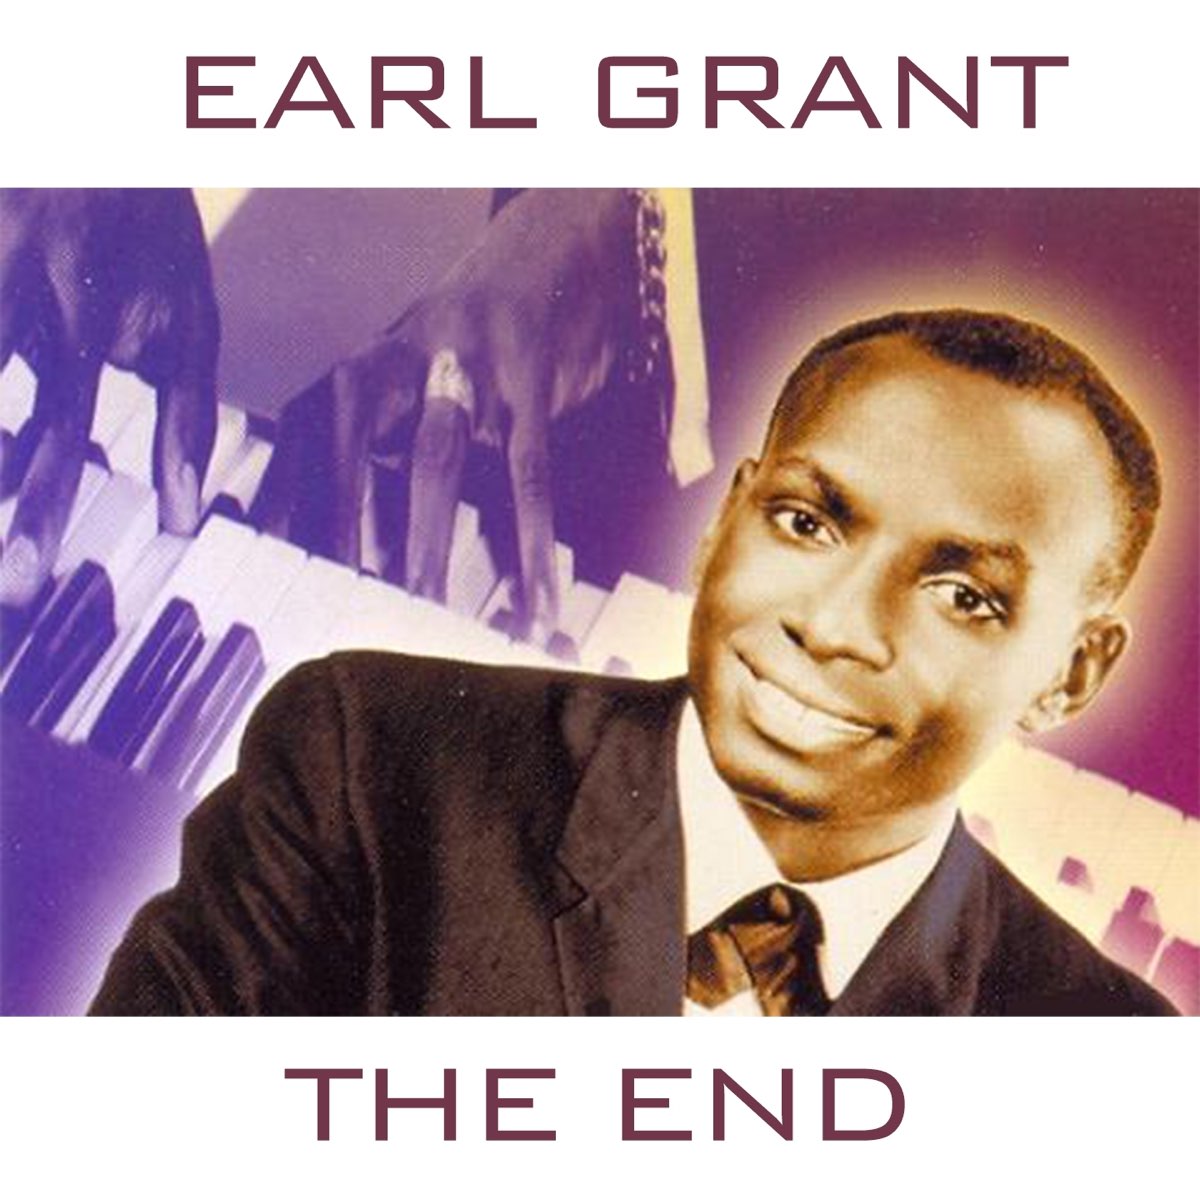 The End - Single - Album by Earl Grant - Apple Music